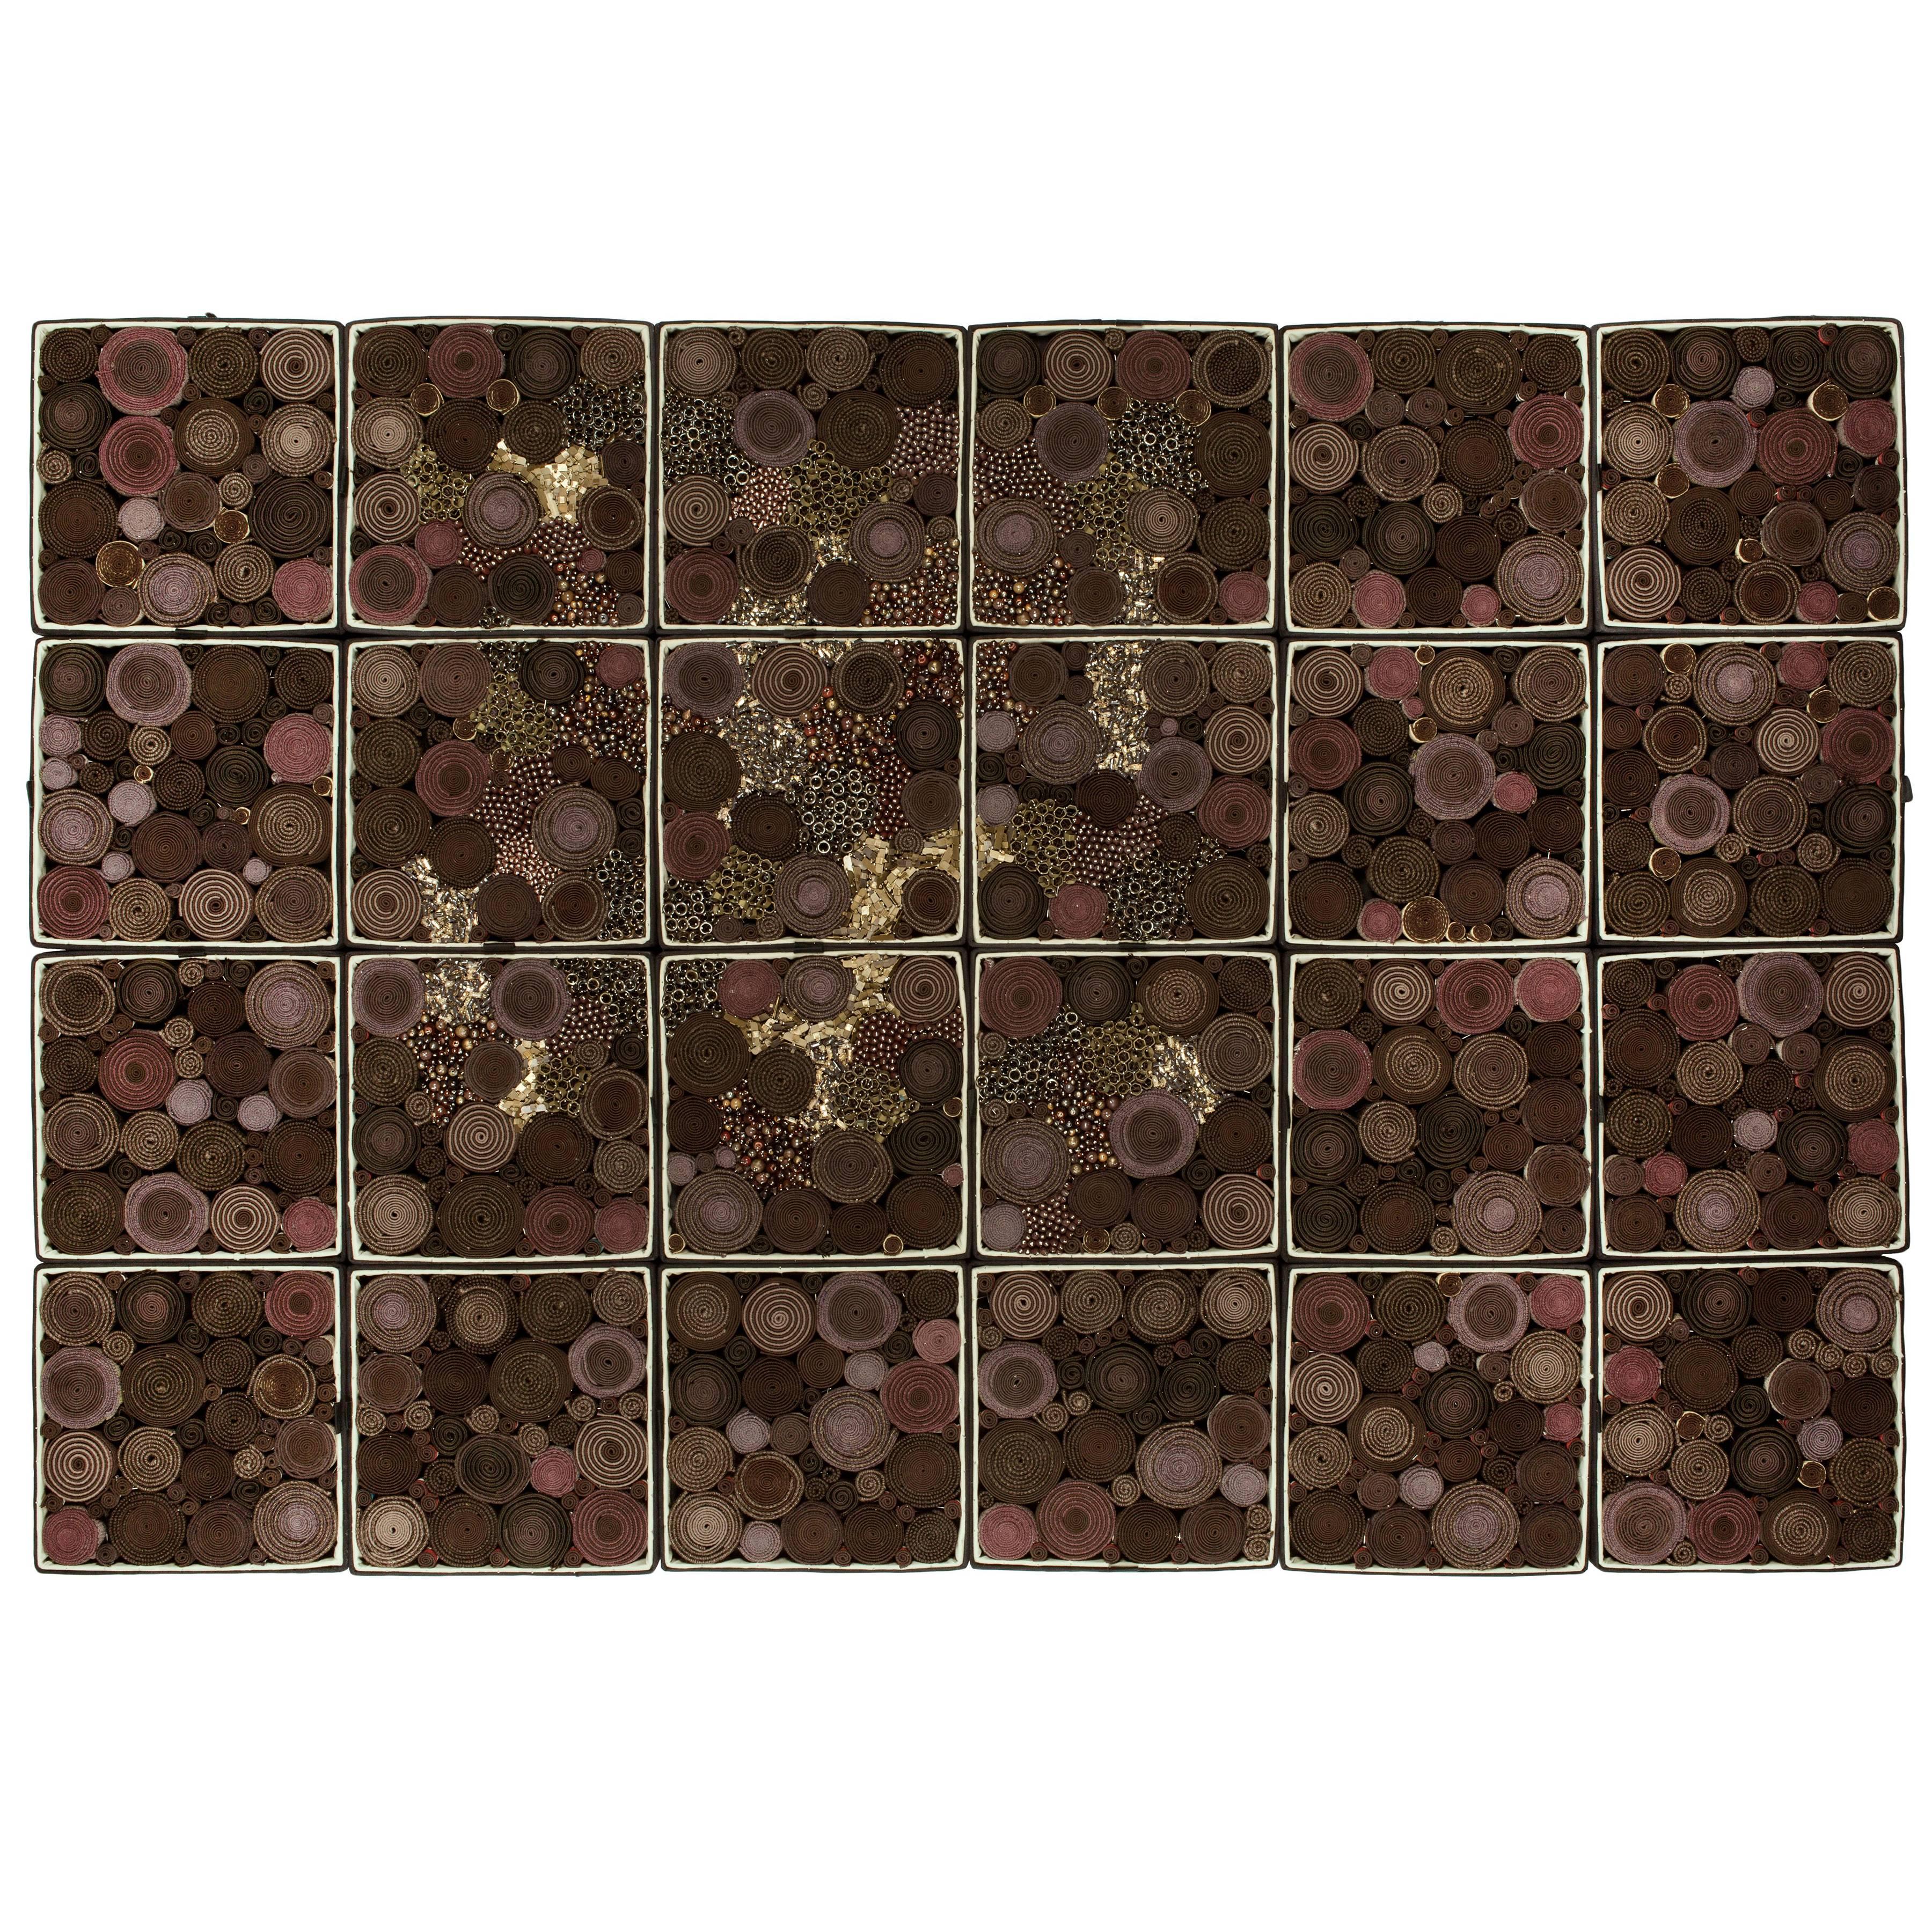 Steven and William Ladd "Chocolate" in Beads, Fabric and Board Boxes, 2013